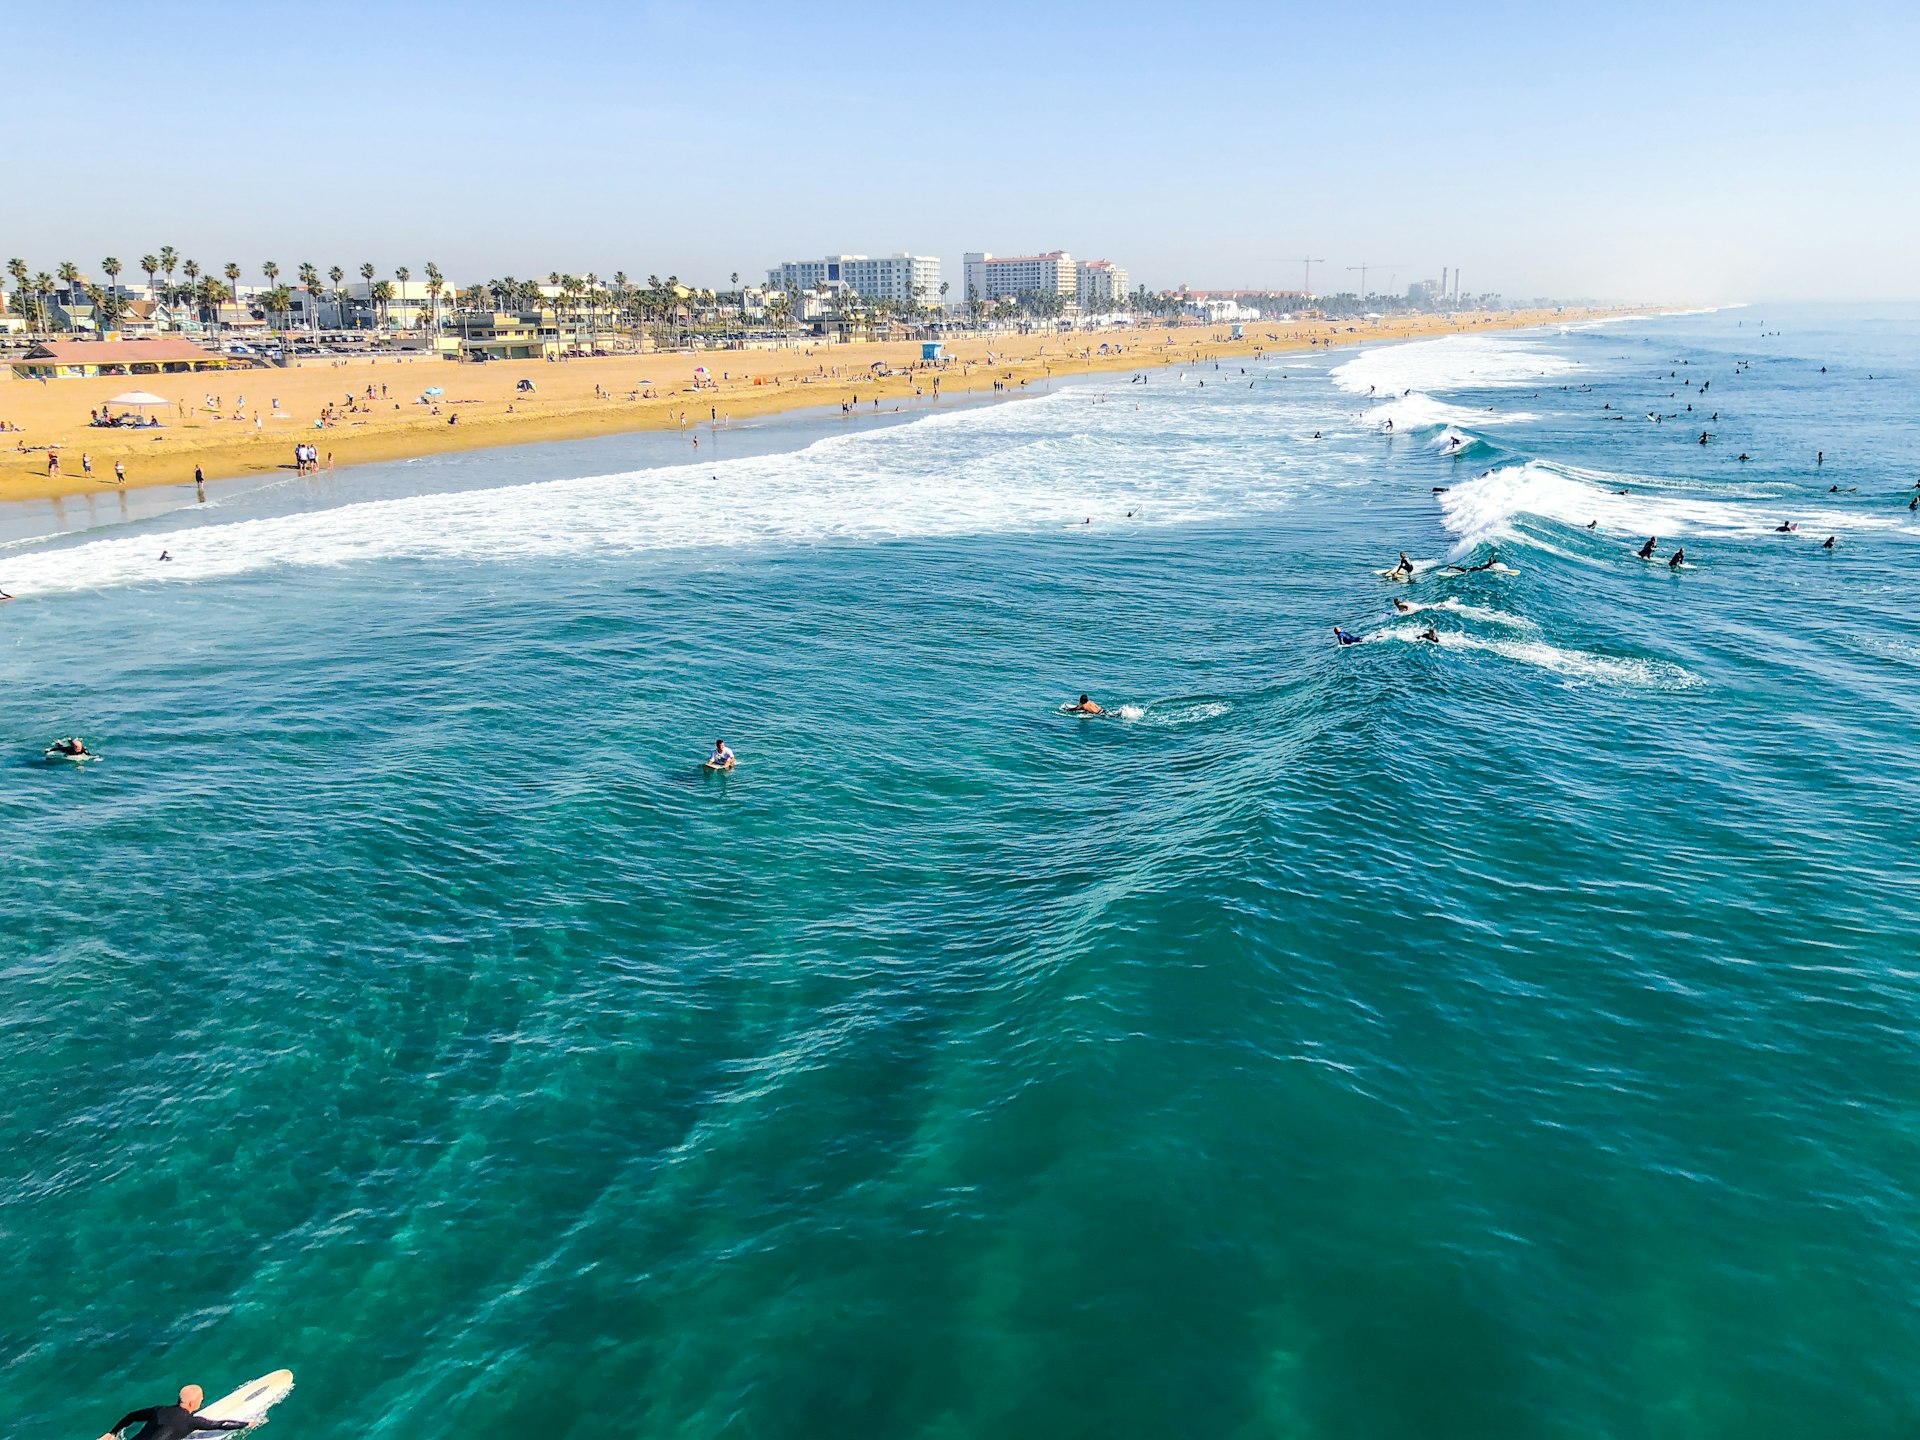 Huntington Beach (also known as Surf City USA) in Orange County, Southern California